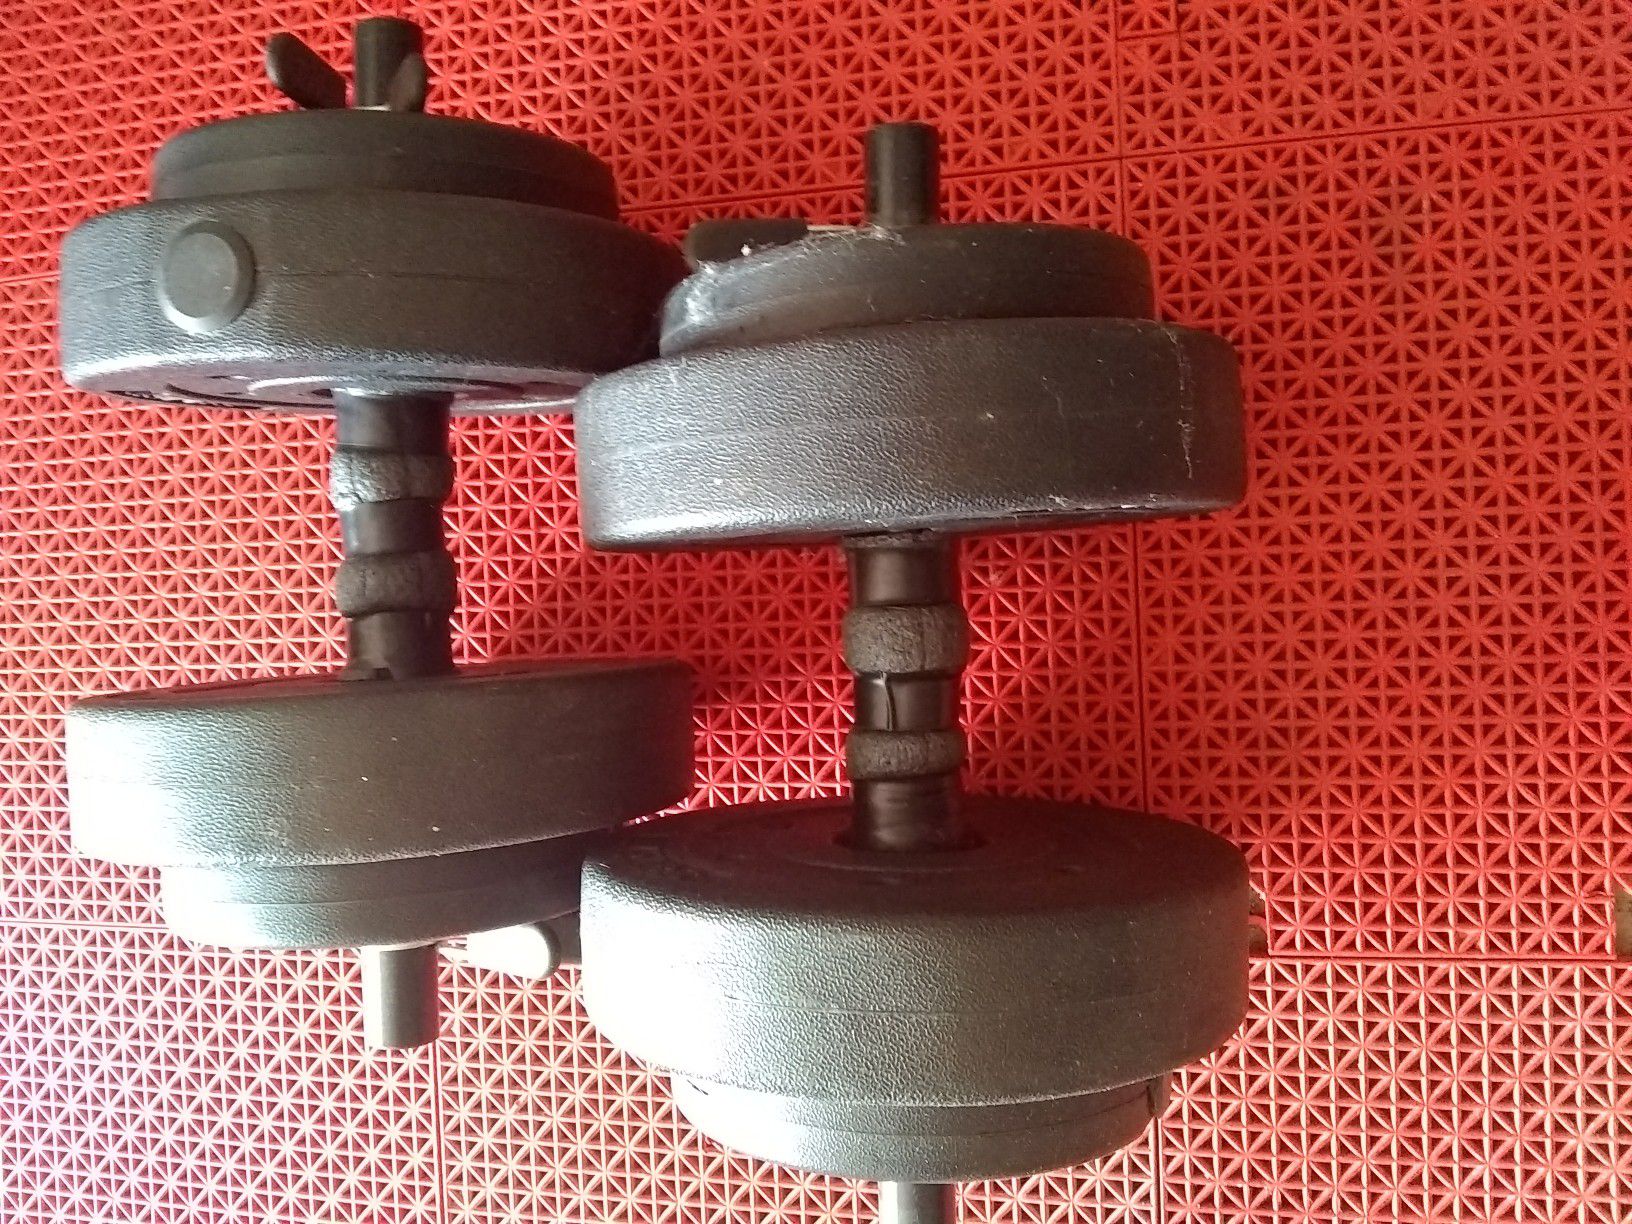 2 dumbbells with 20 pds of weight